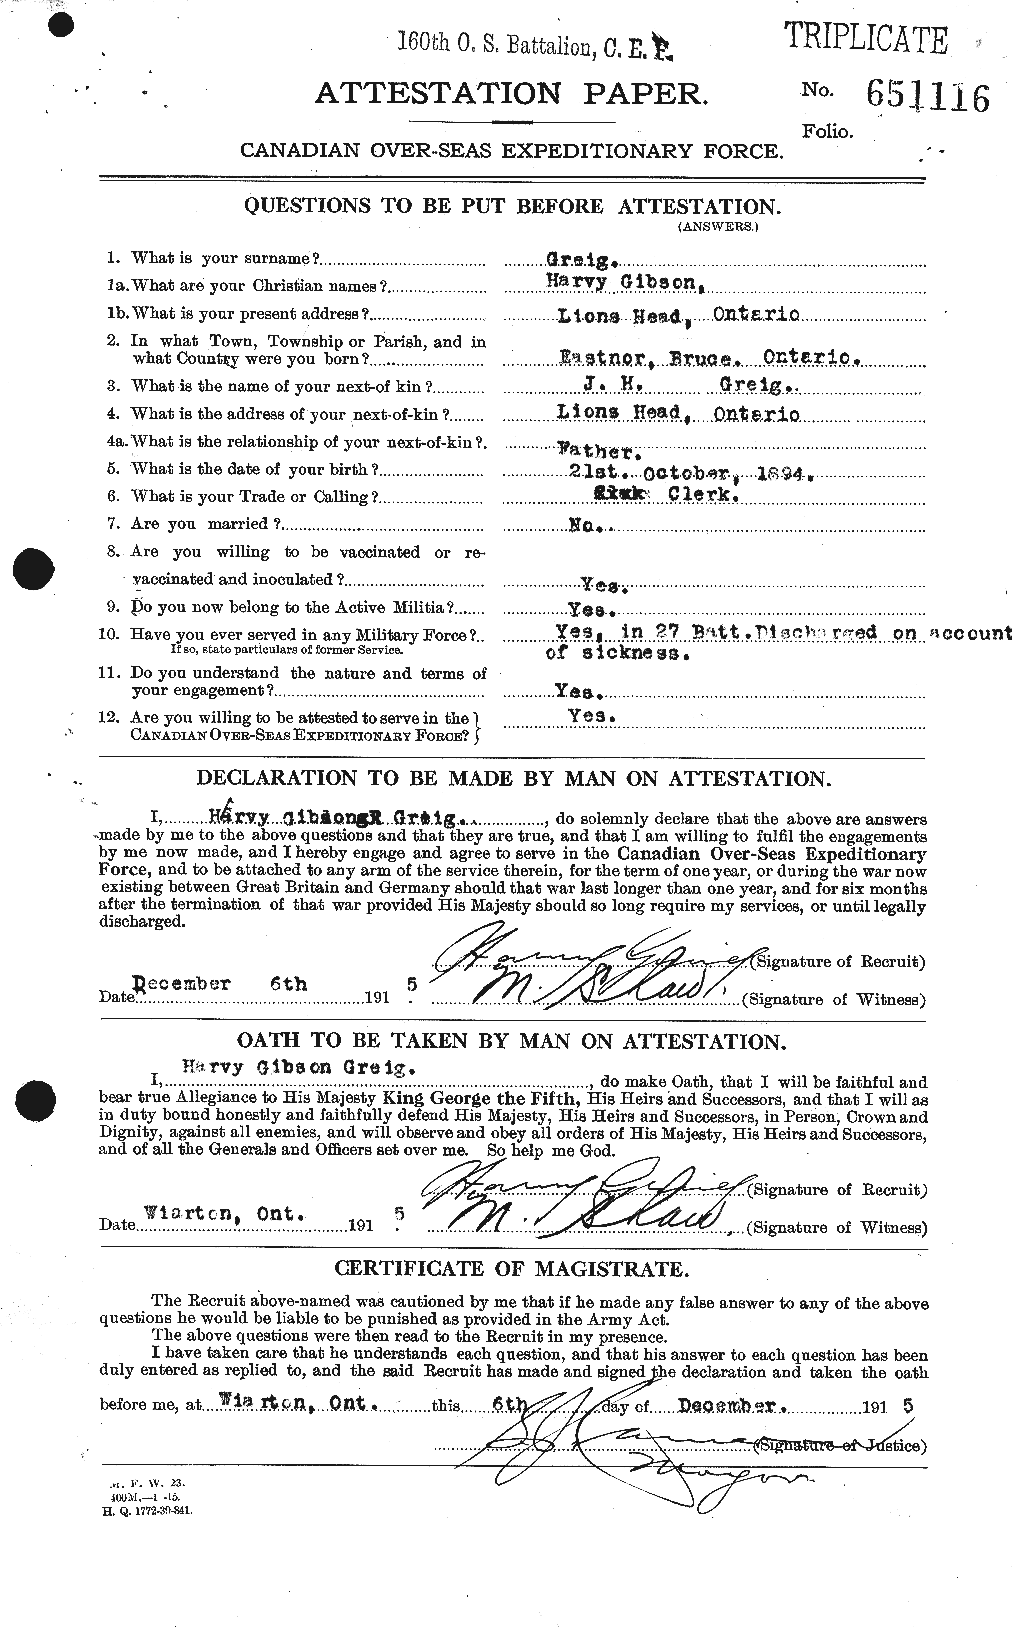 Personnel Records of the First World War - CEF 363180a